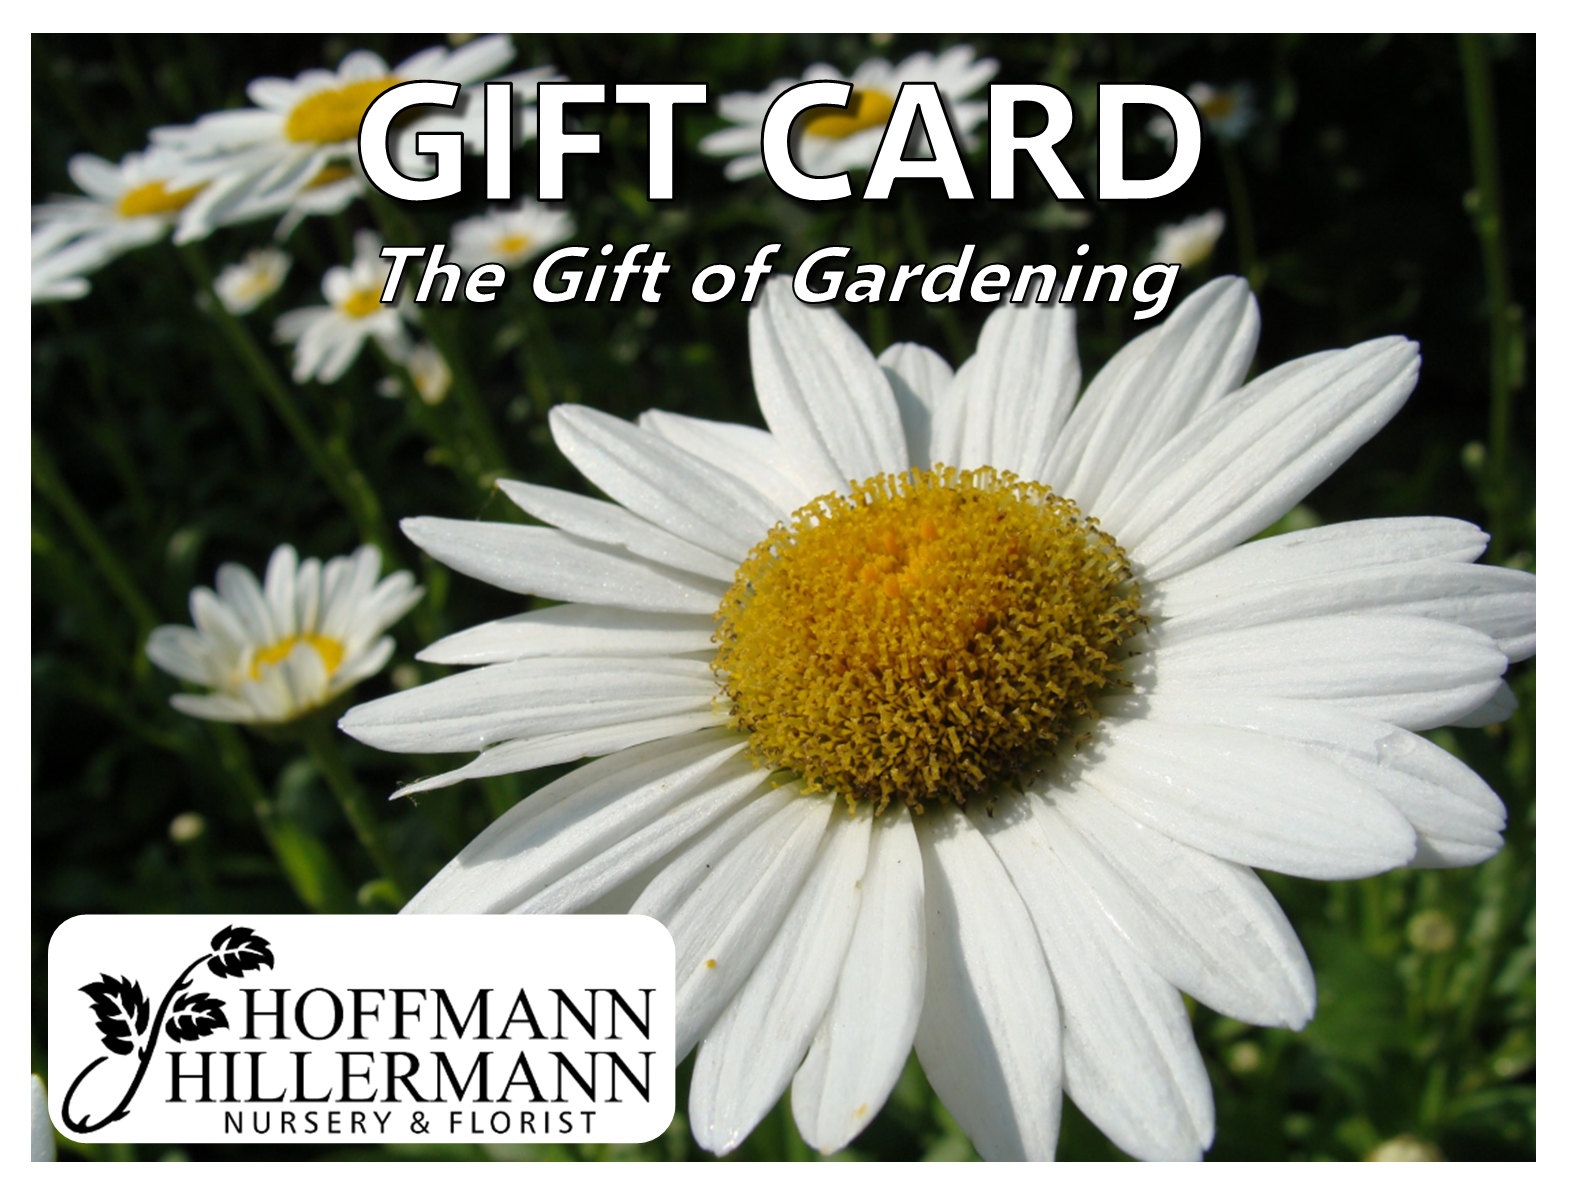 Gift Cards & Gifts